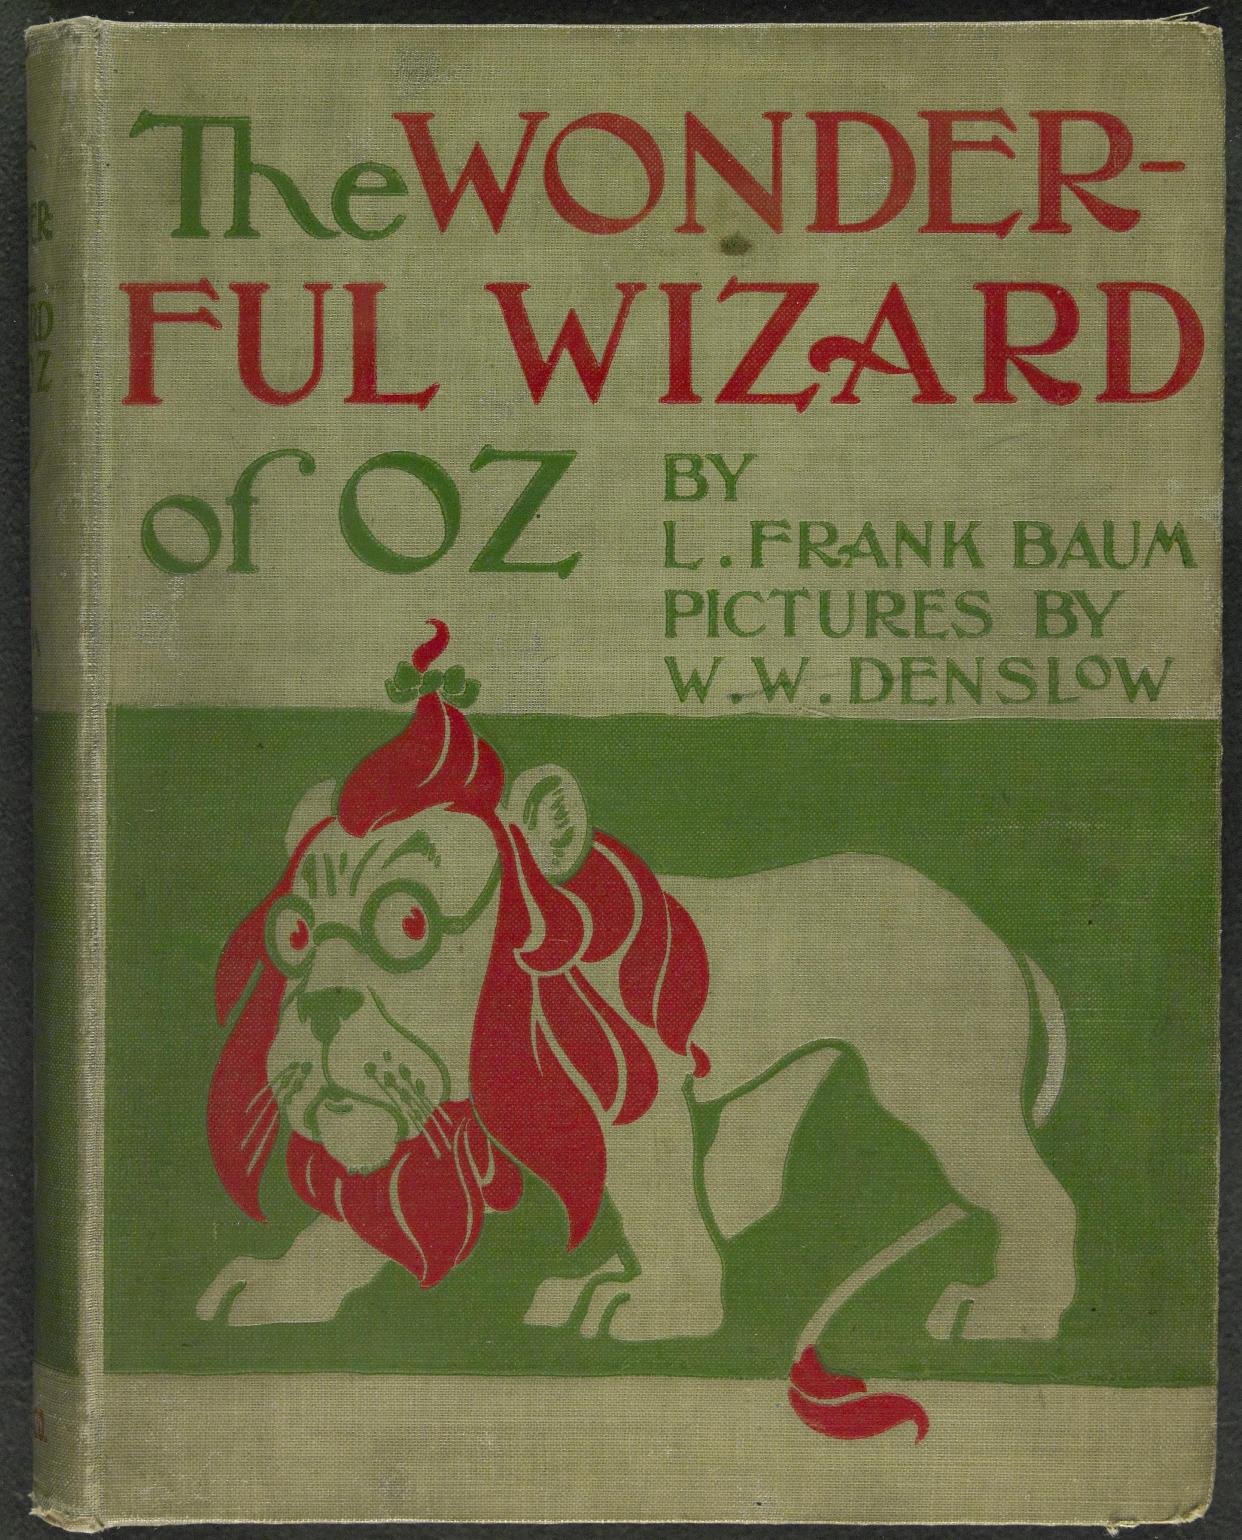 The book "The Wonderful Wizard of Oz" was written as a children's fantasy by L. Frank Baum, but many also believe it was an allegory for conditions in the United States at the time of President William McKinley.